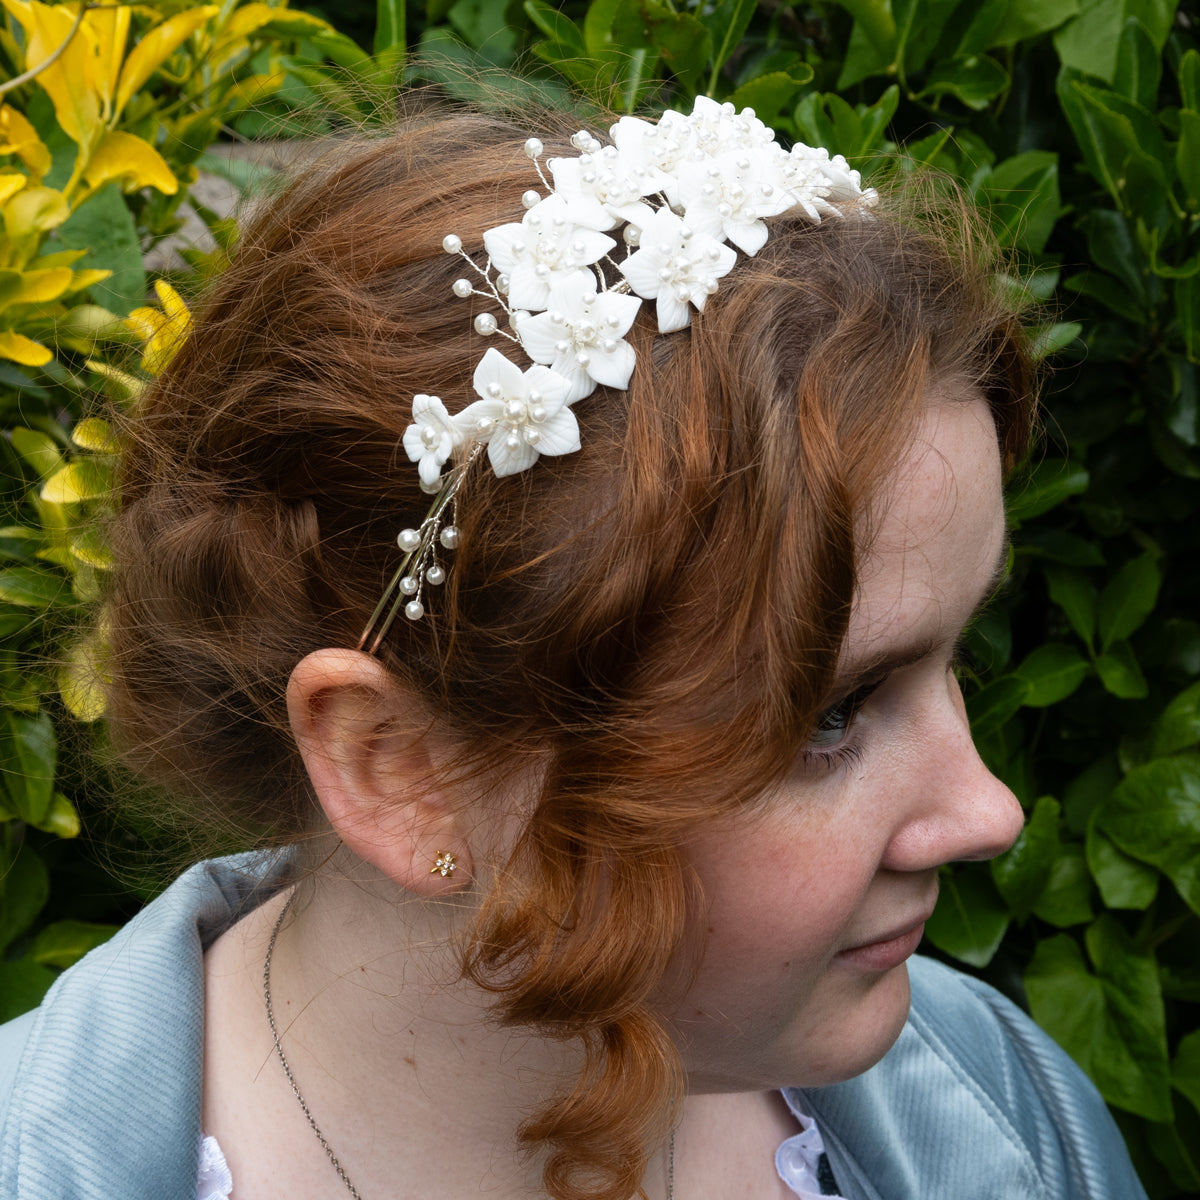 Netherfield Ball Pearl and Flower Hair Accessory